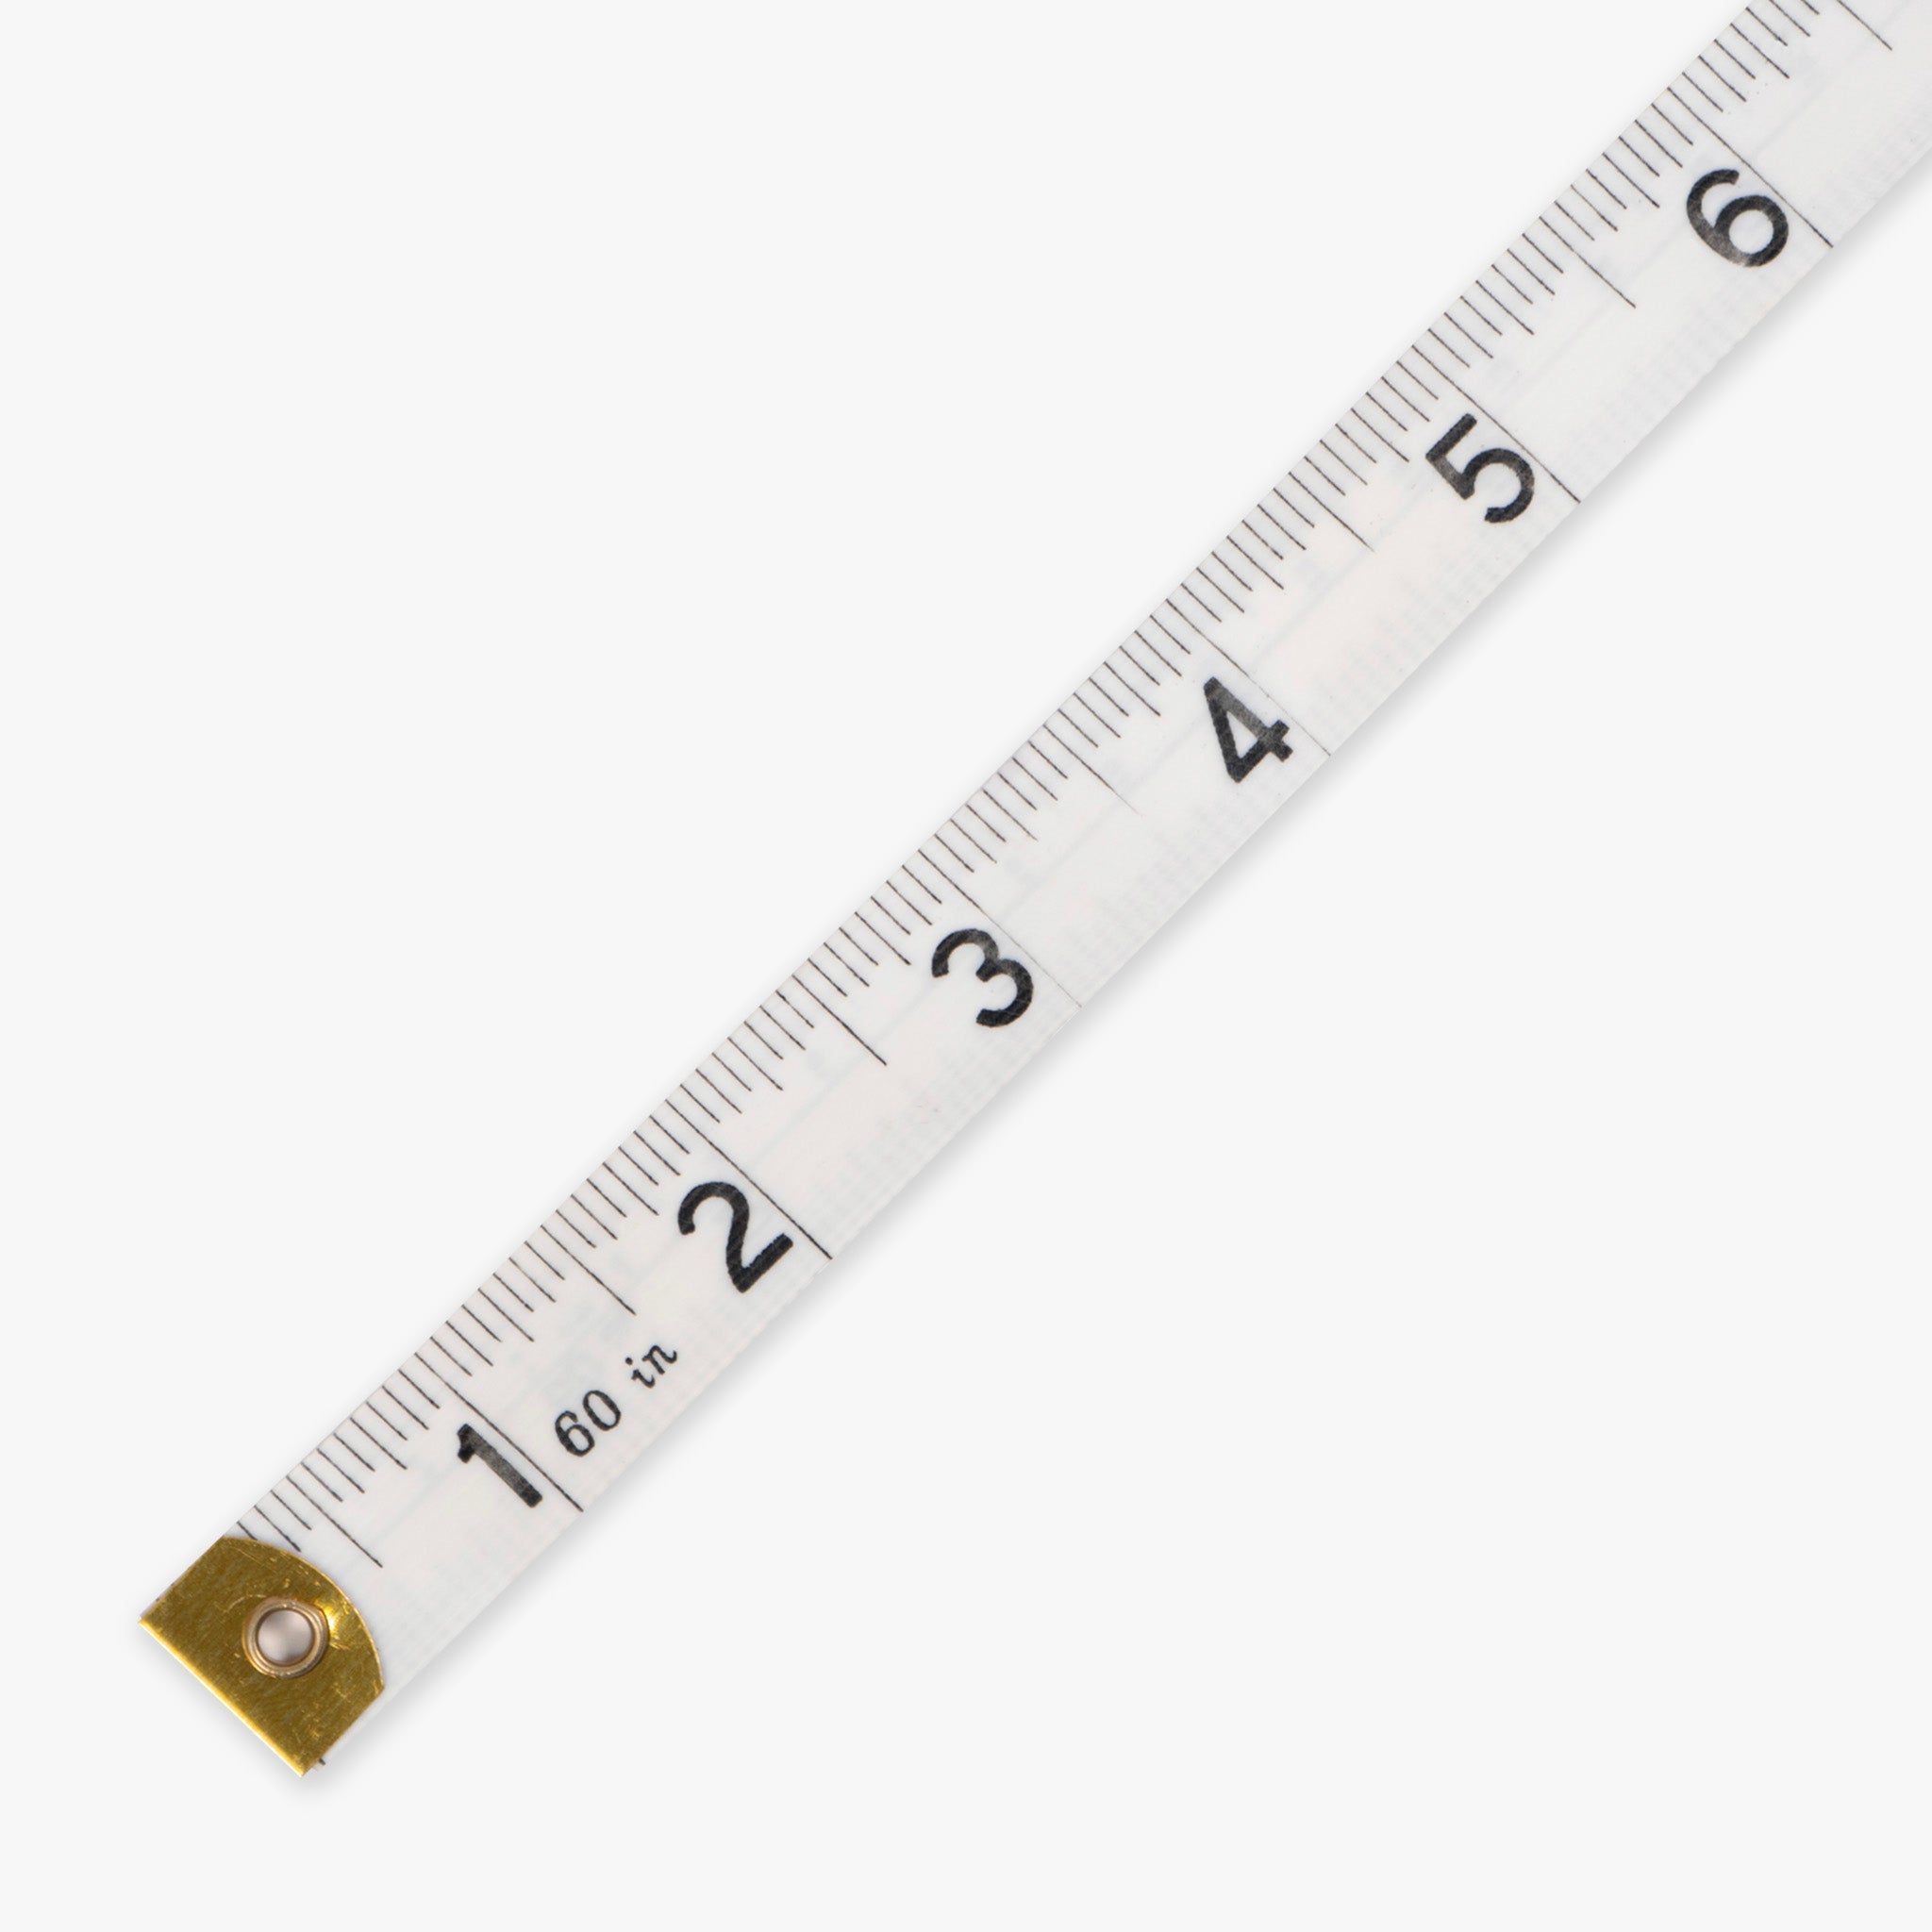 Uxcell 2M Cloth Tape Measure 79 Inch Measuring Tape White, 50% OFF